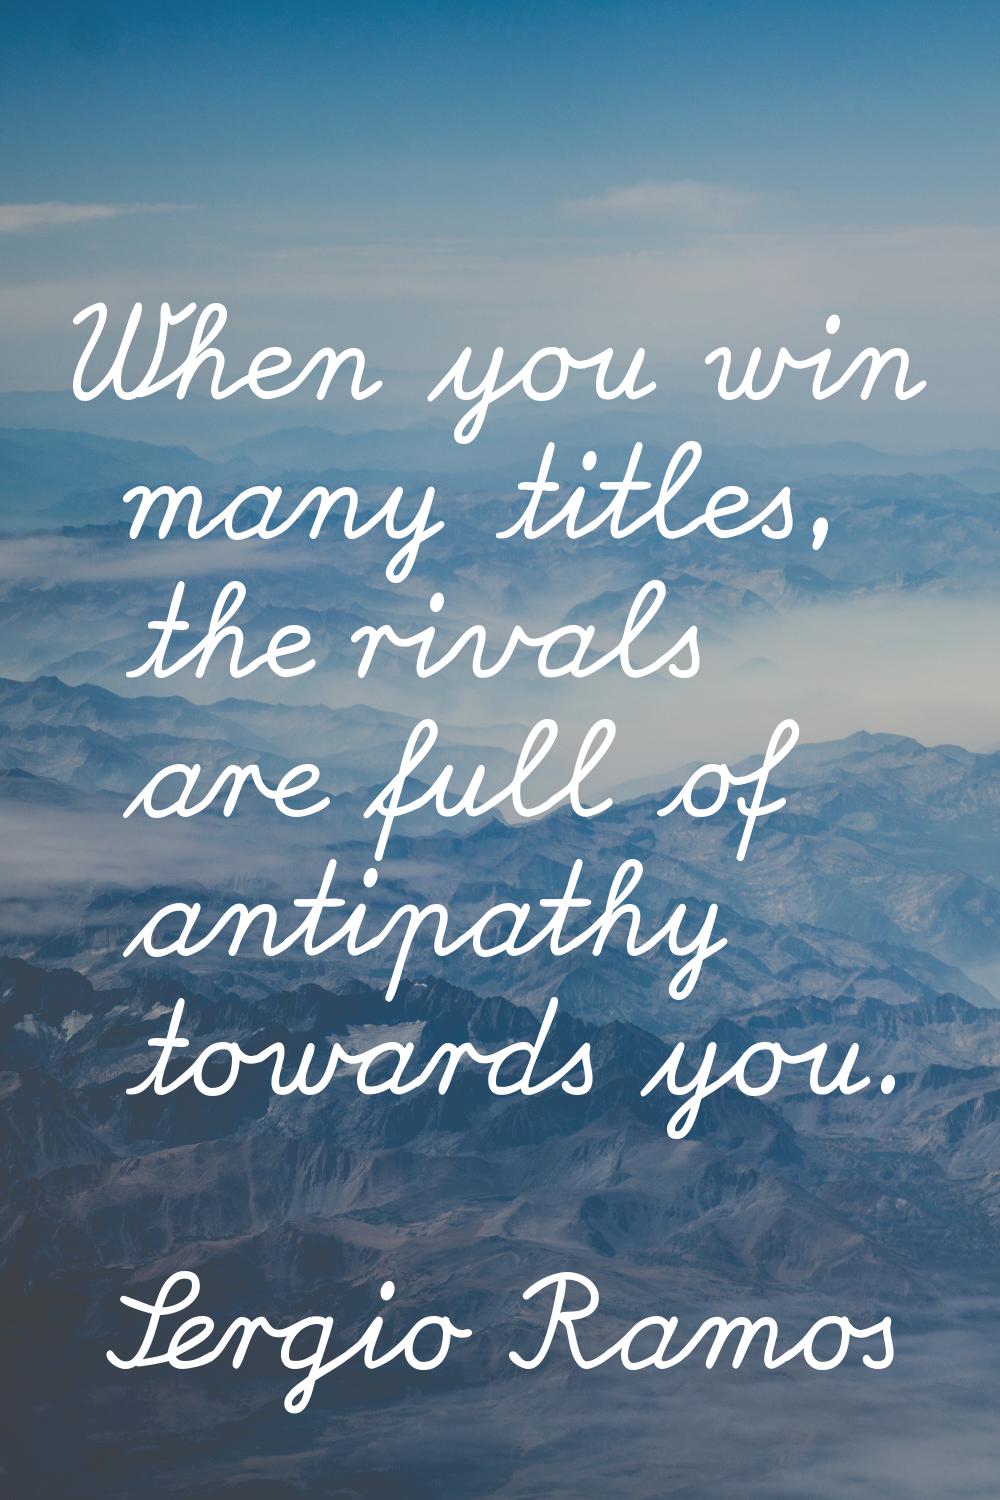 When you win many titles, the rivals are full of antipathy towards you.